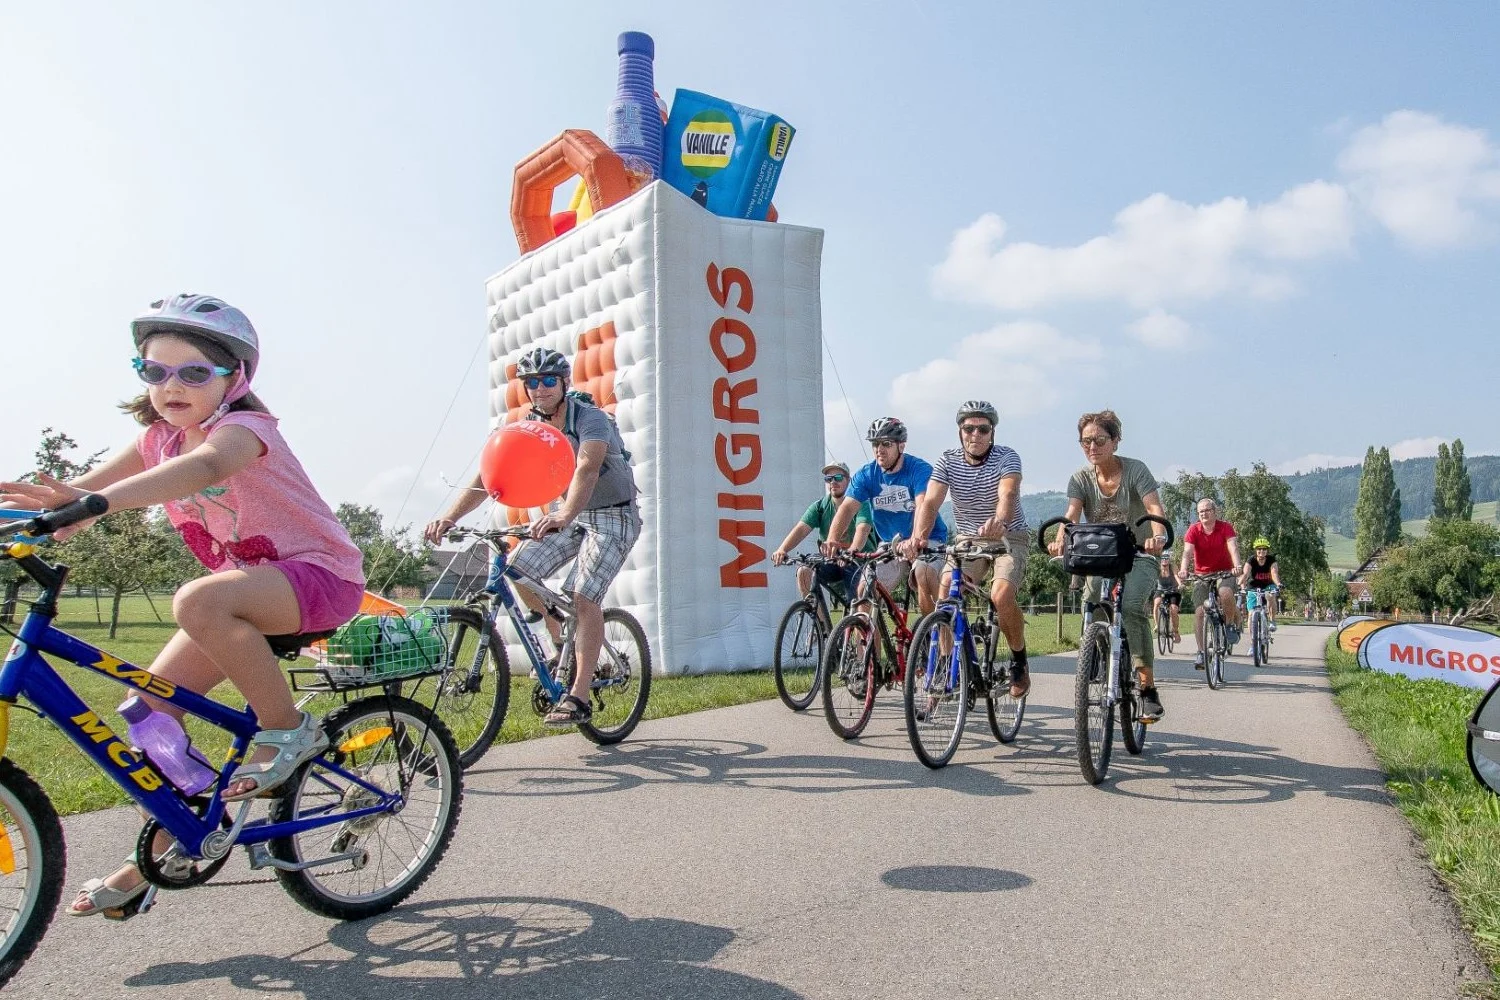 Several people are riding their bikes in front of a large inflatable Migros shopping bag.